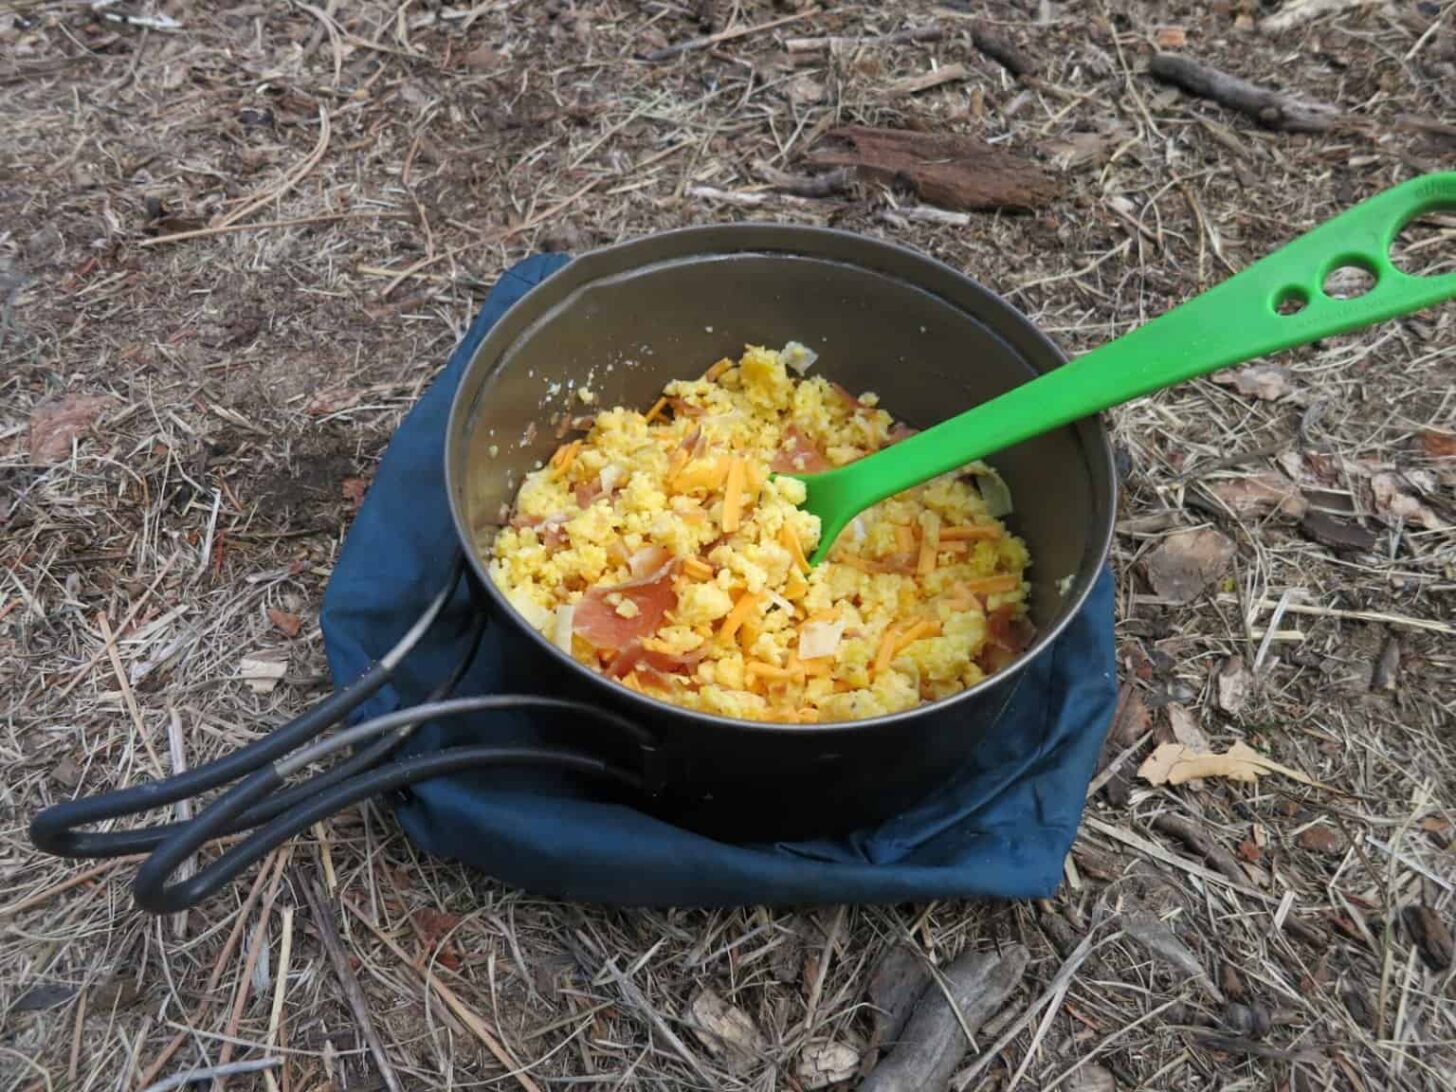 A bowl of backpacking food sitting on the ground.